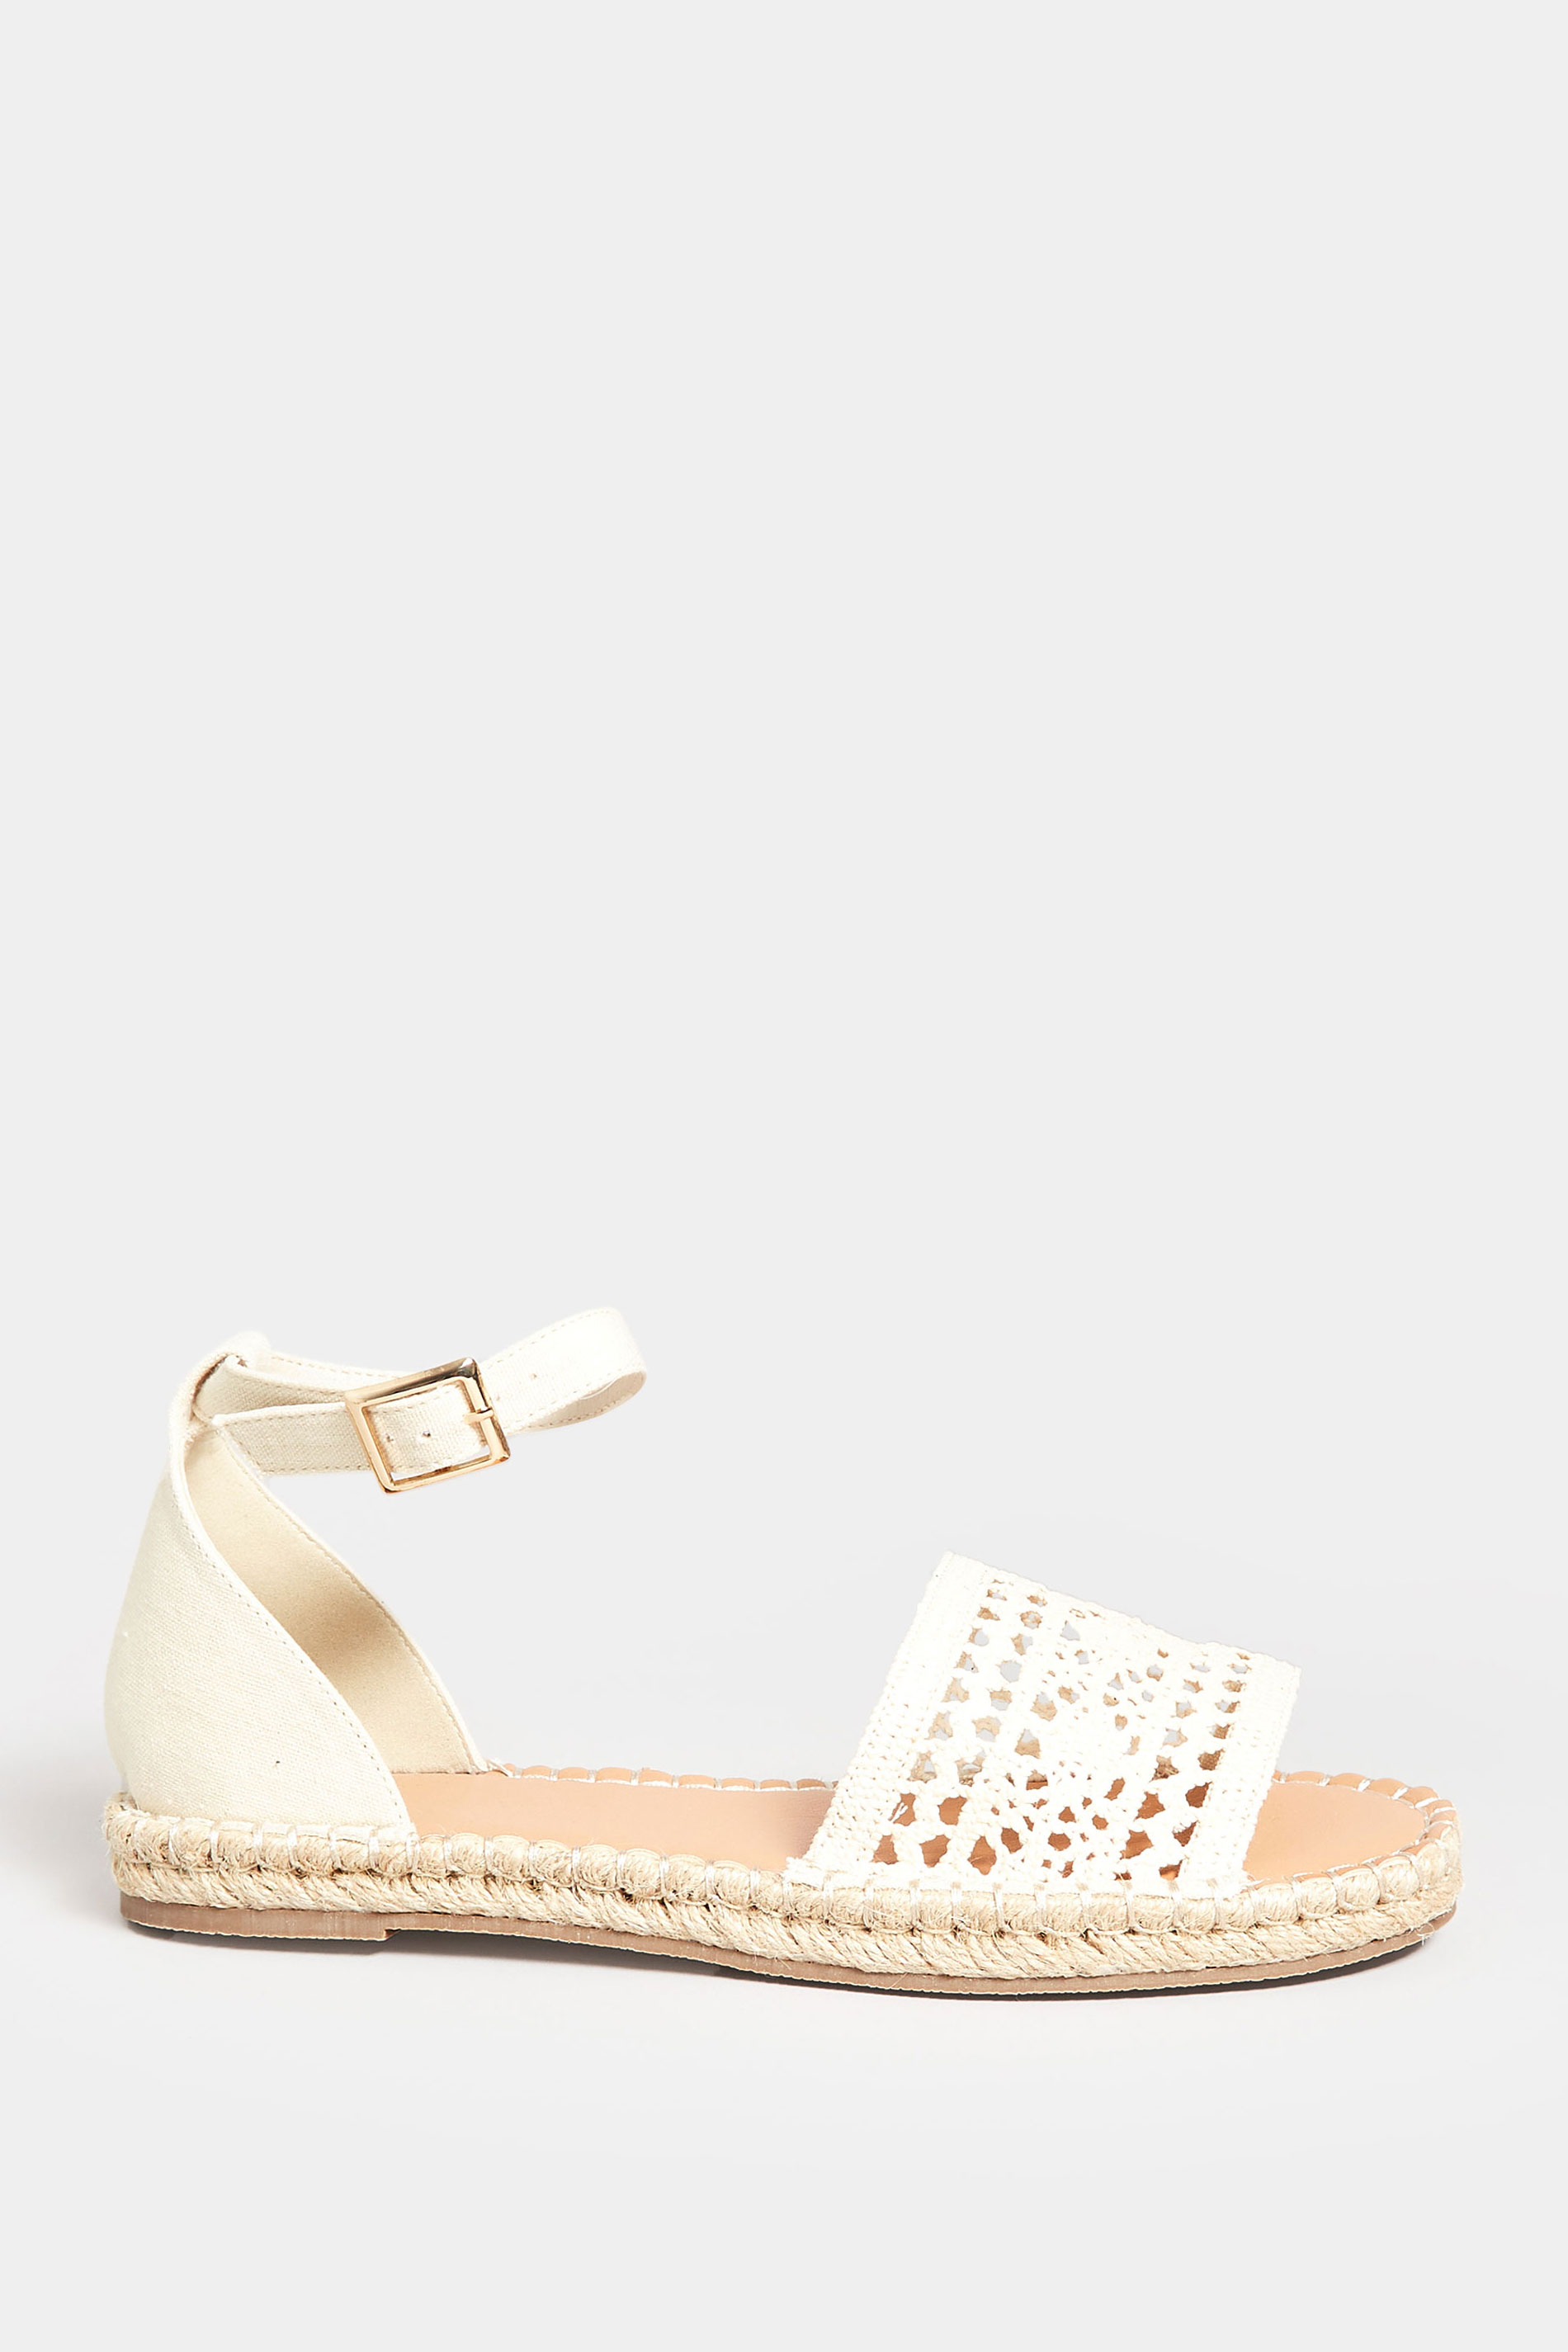 LTS Cream Espadrille Sandals In Standard Fit | Long Tall Sally 3